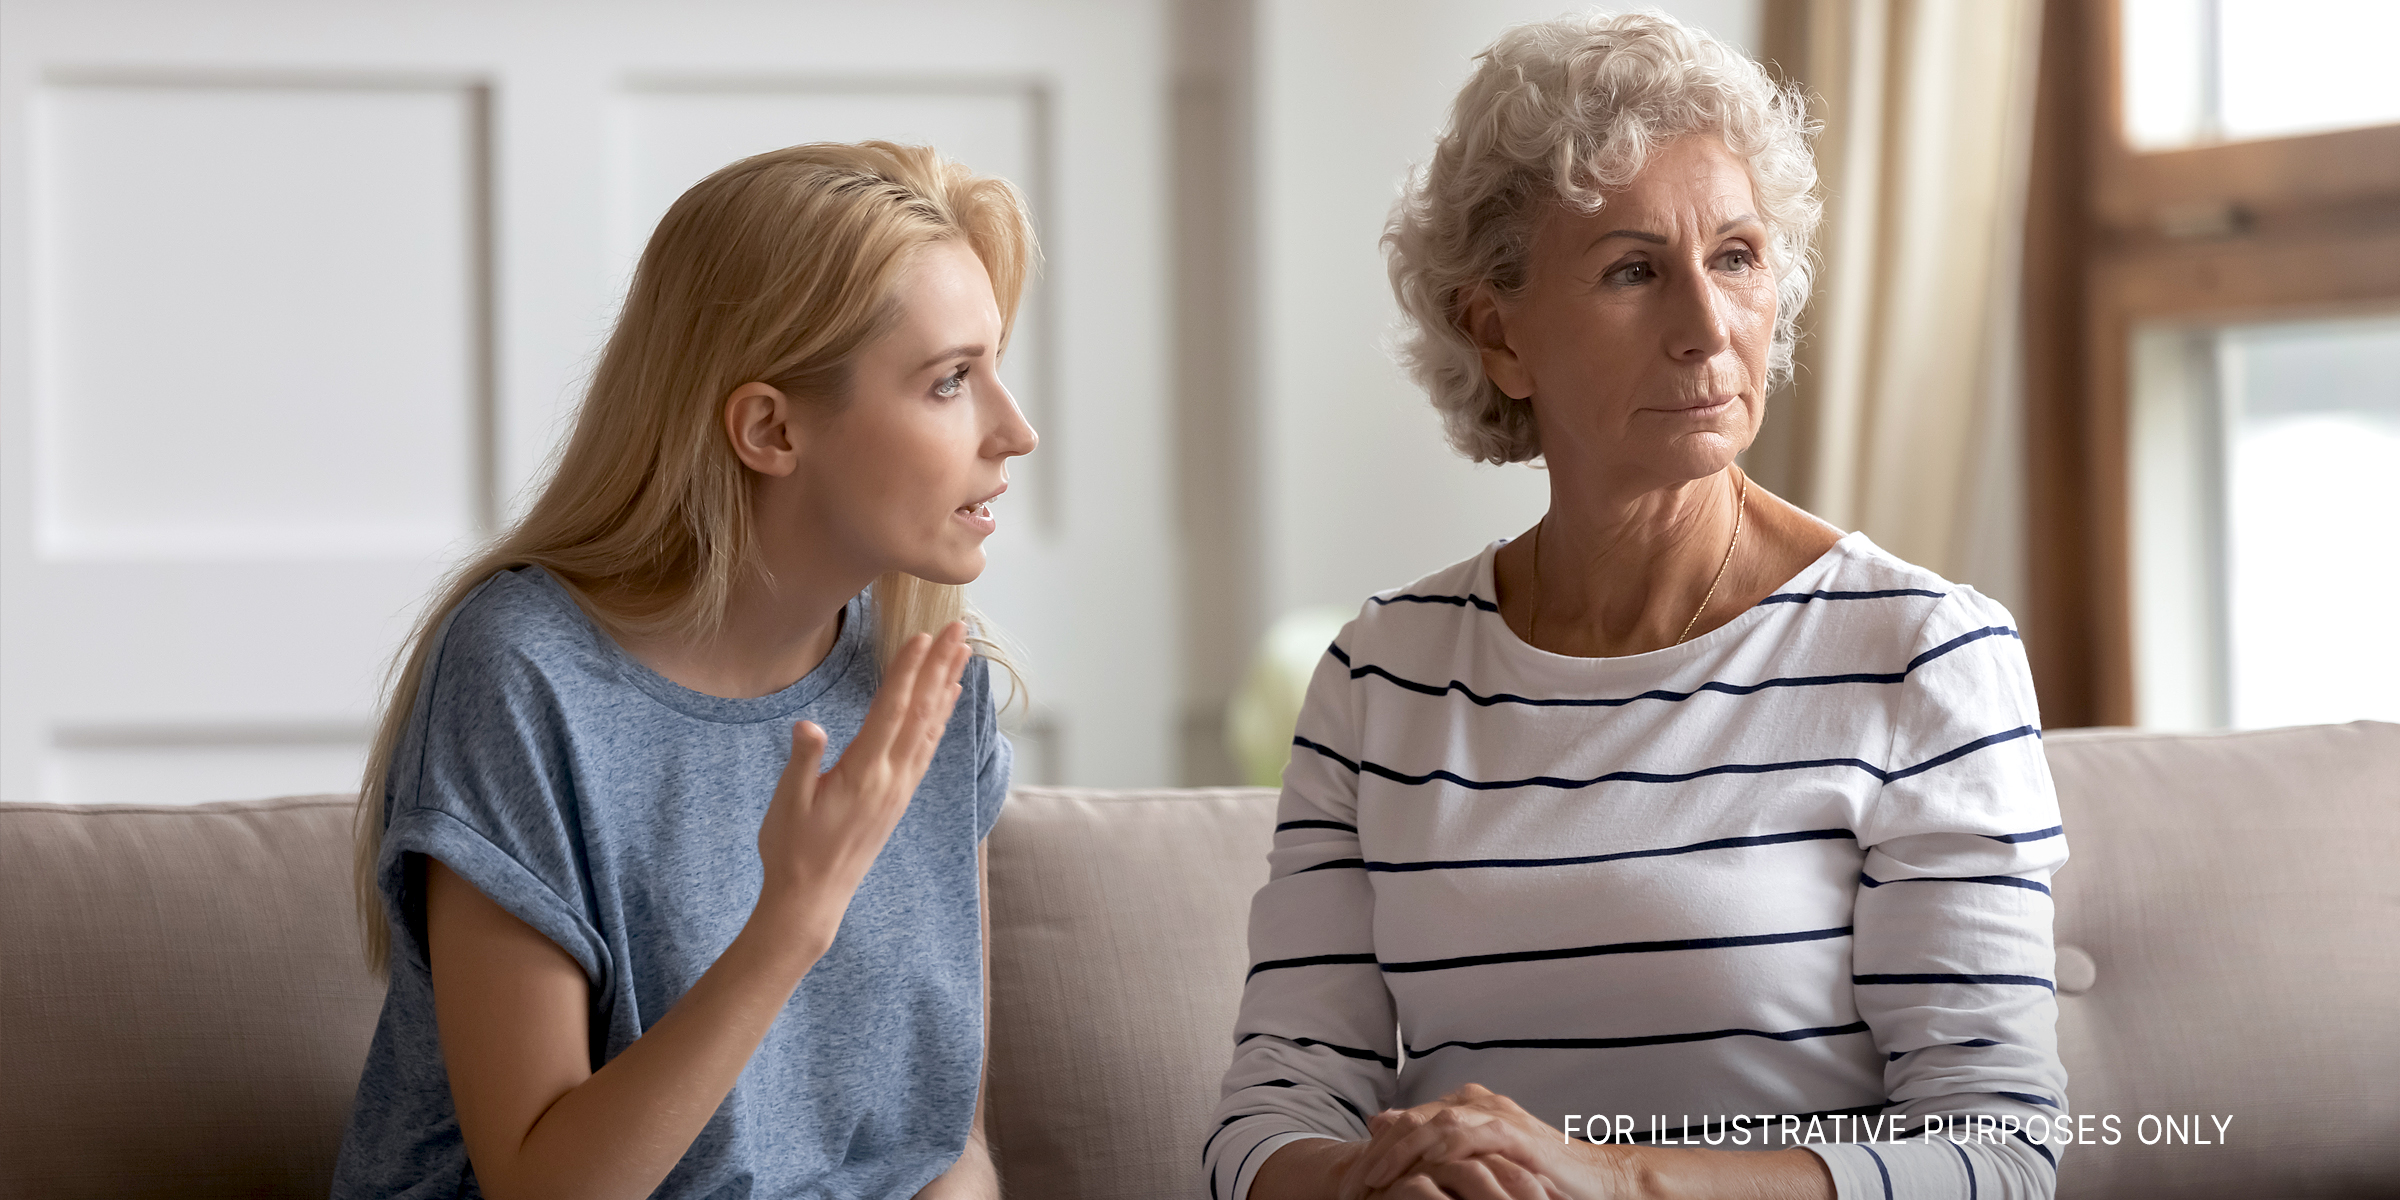 A young woman talking sternly to an older woman | Source: Shutterstock